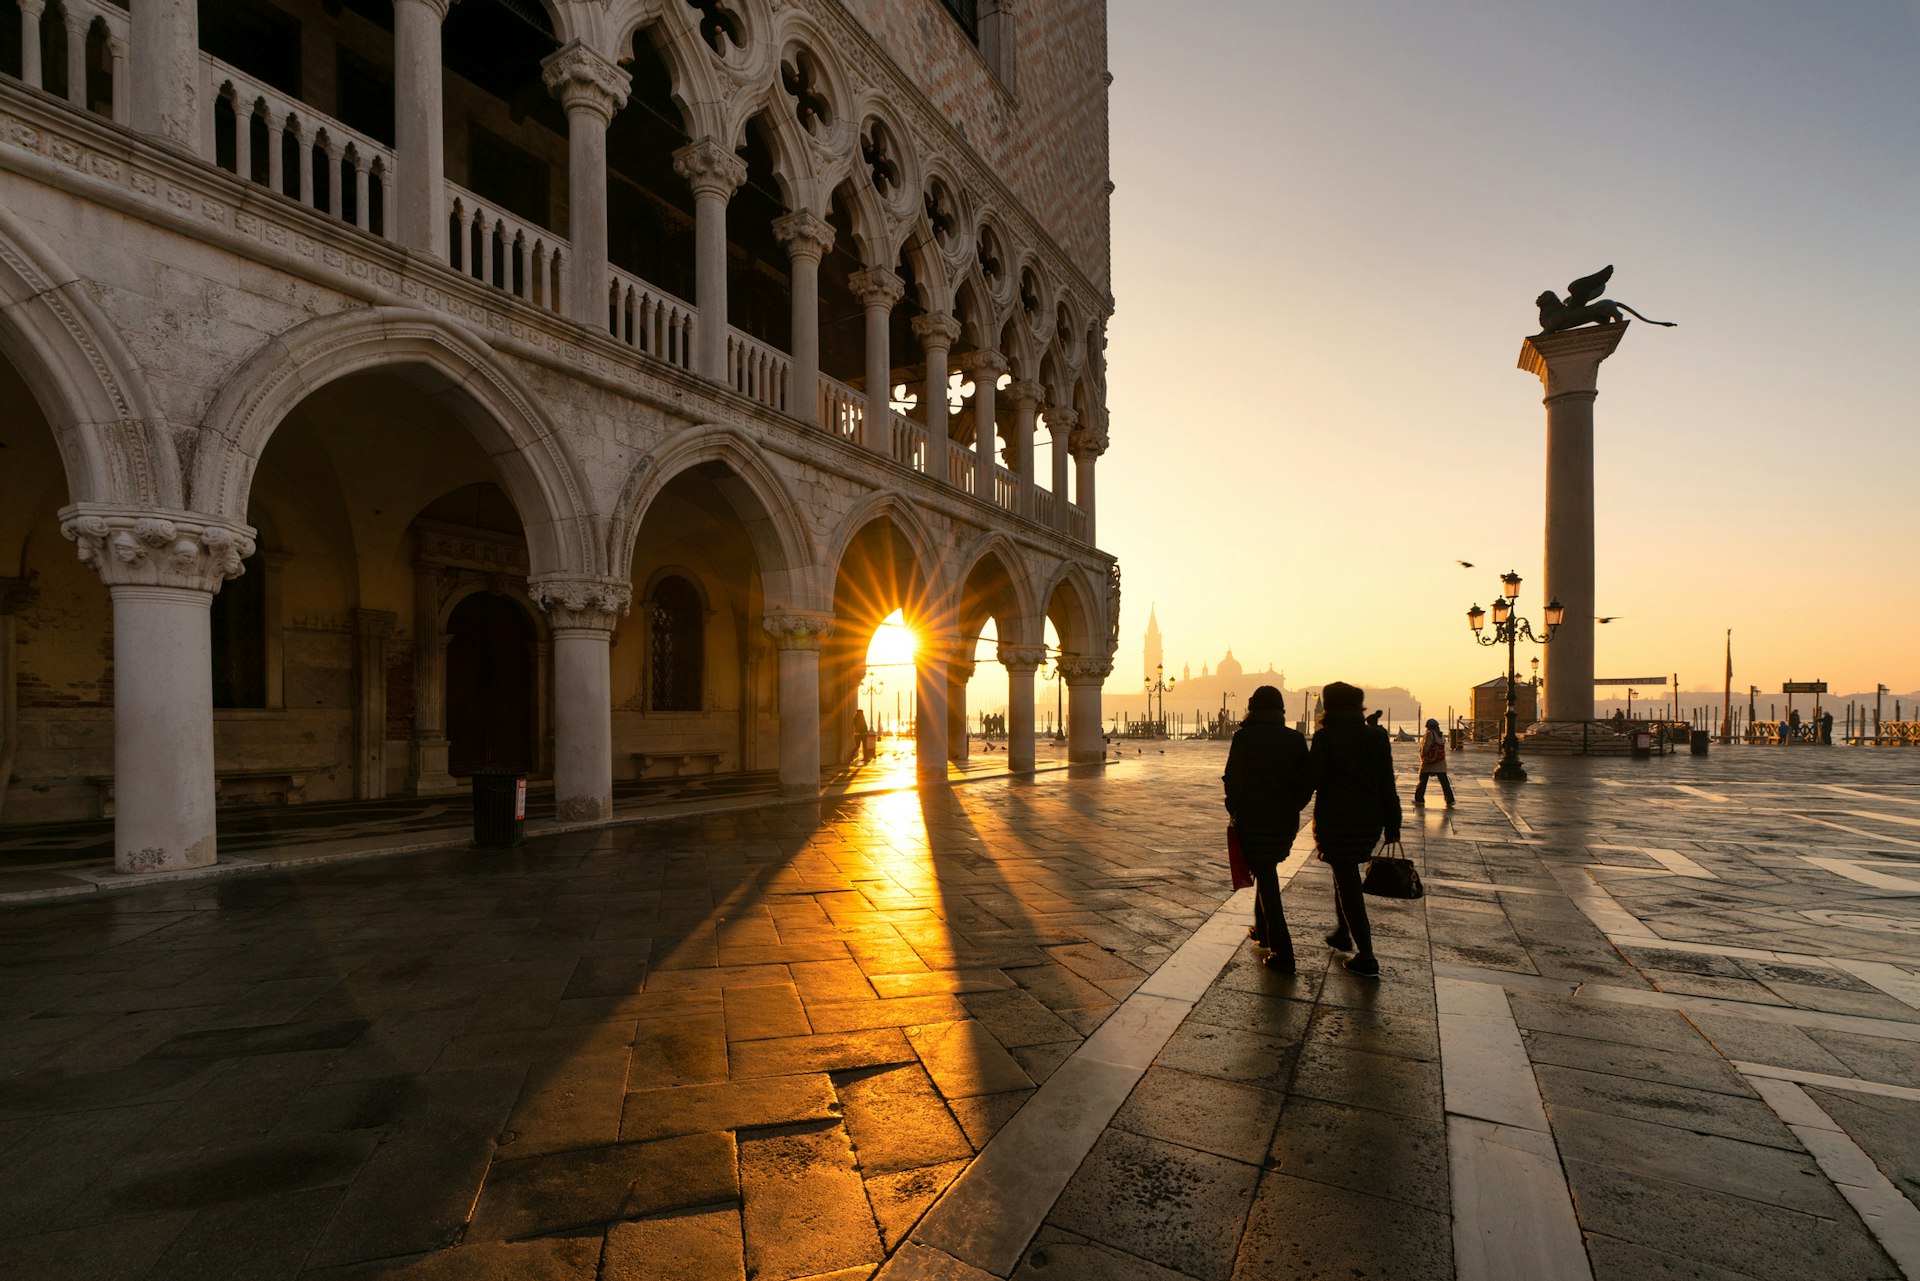 A couple walk near the empty arches of the Doge's Palace in Venice. Silhouetted by the morning sun breaking over the Grand Canal, the pair walk towards the water and a tall statue, the yellow rays of the sun peeking past the pillar holding up the Palace.